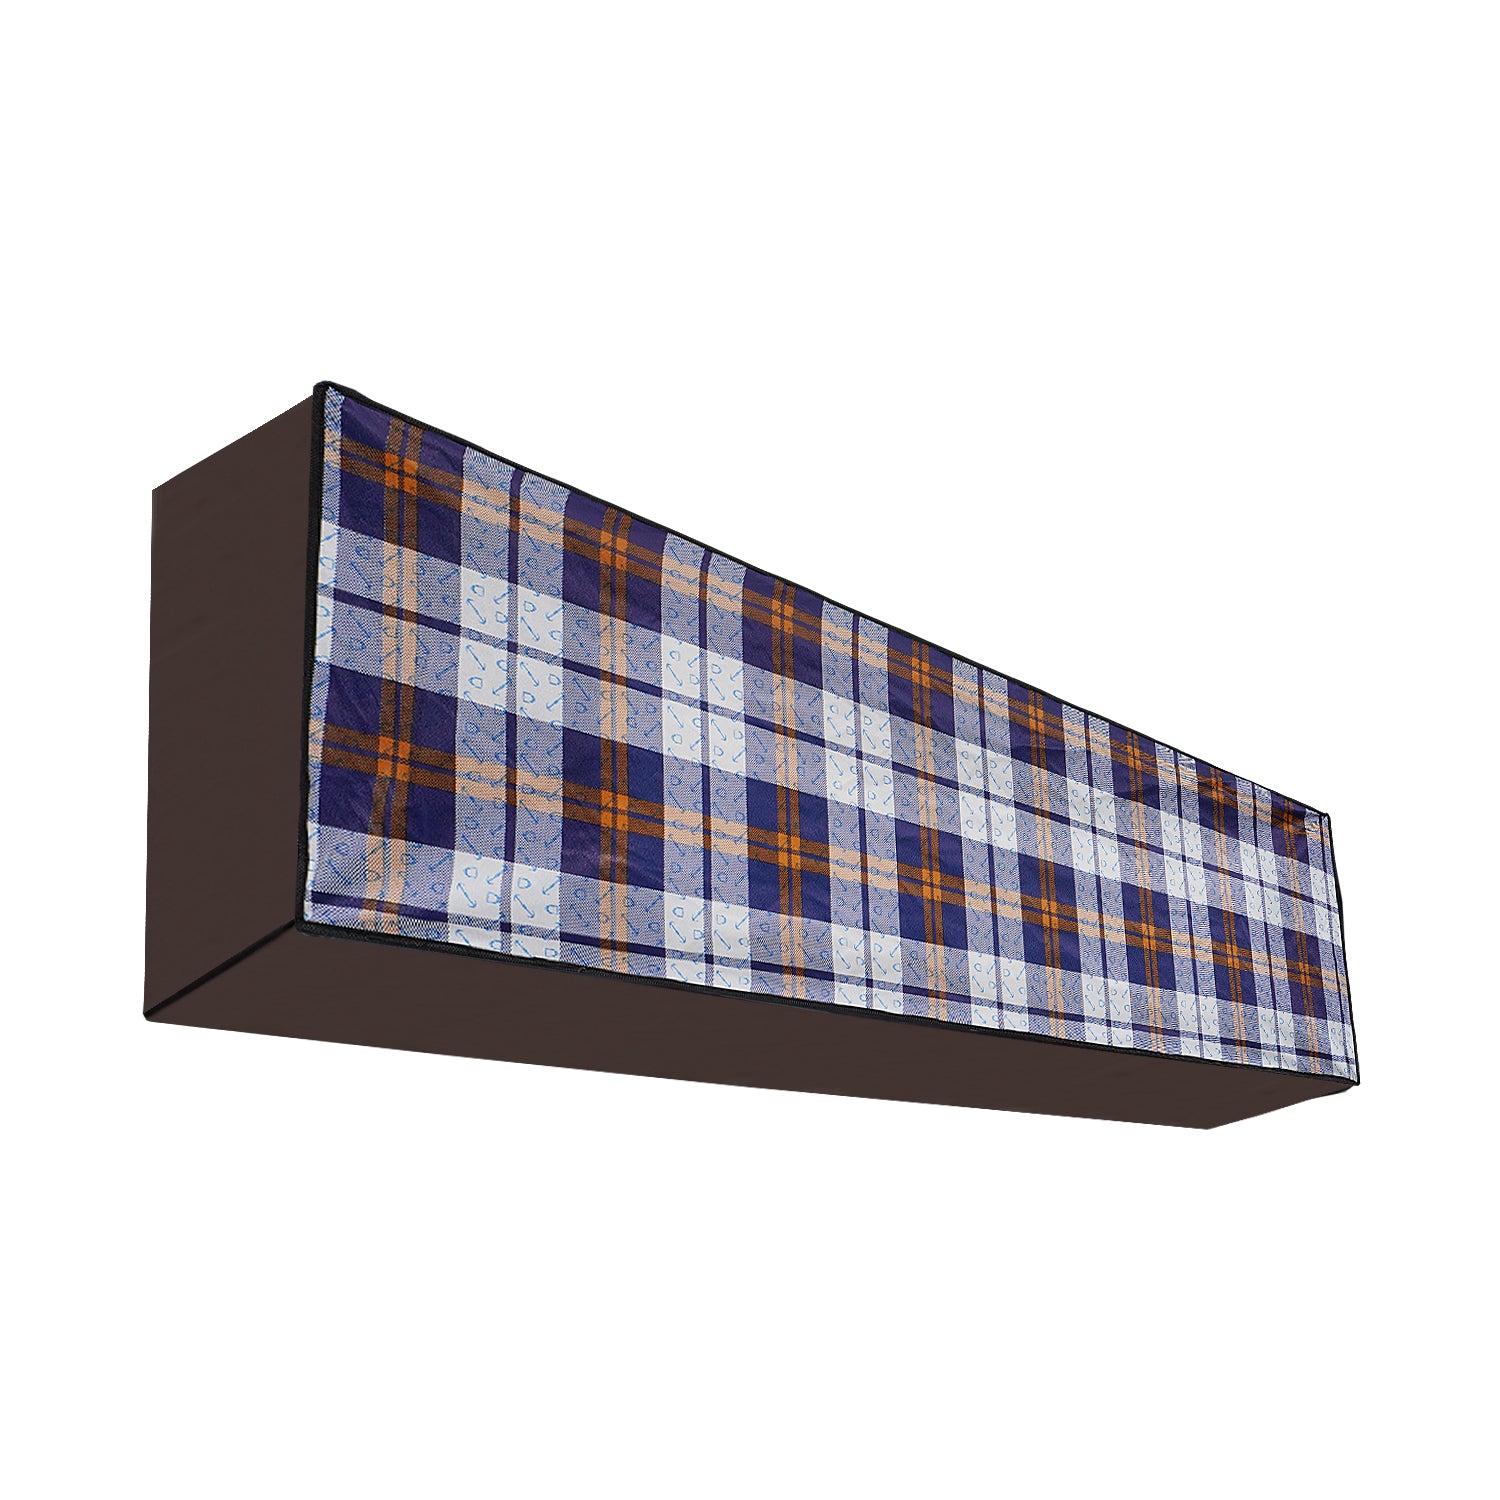 Waterproof and Dustproof Split Indoor AC Cover, CA06 - Dream Care Furnishings Private Limited